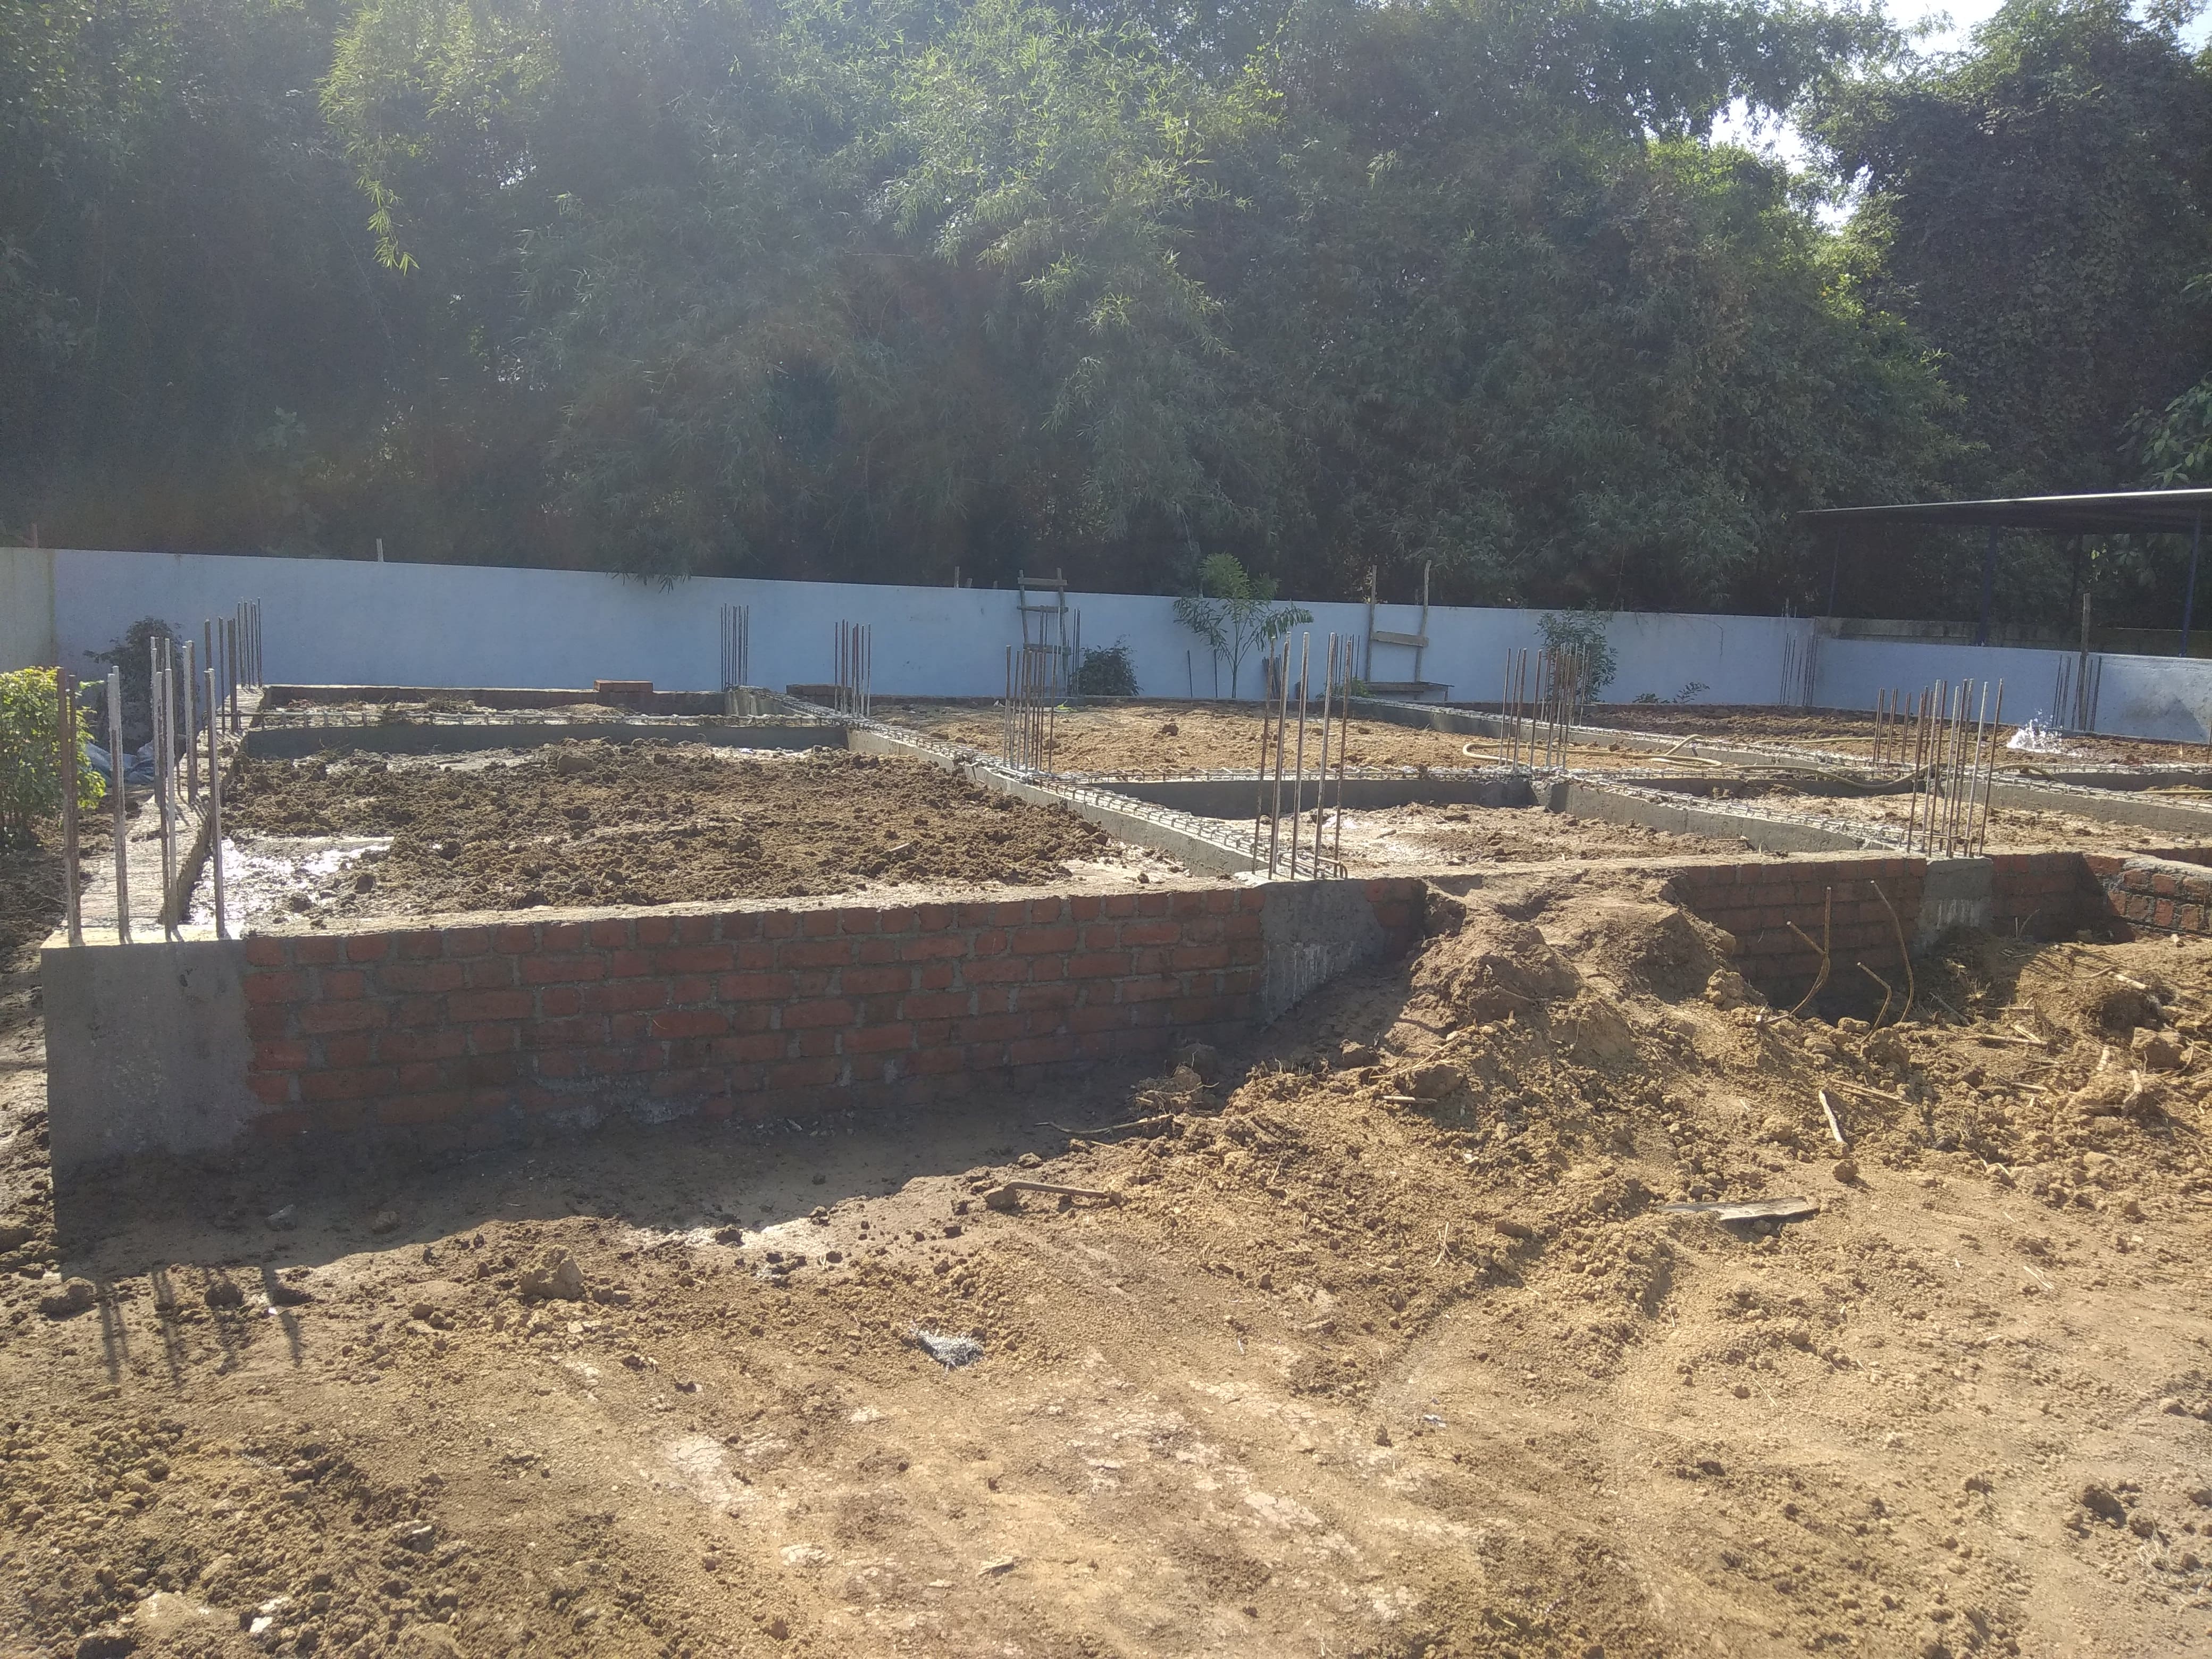 Ground floor foundation in place